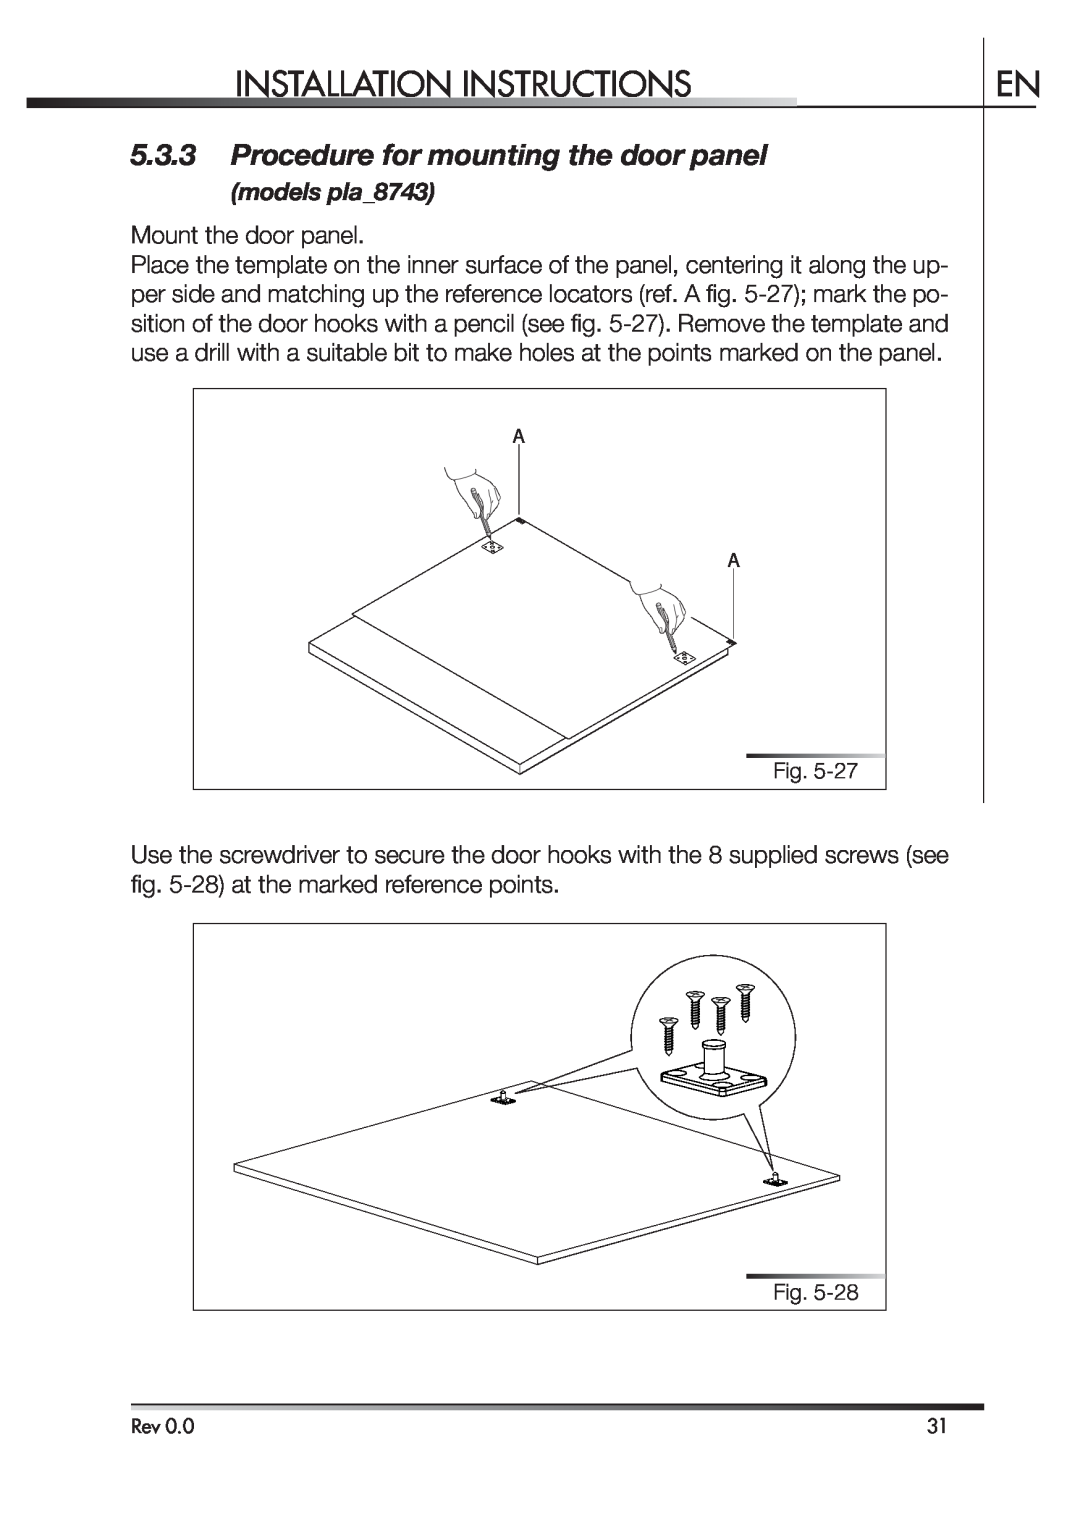 Smeg STA4645 instruction manual Procedure for mounting the door panel, Installation Instructions, models pla8743 